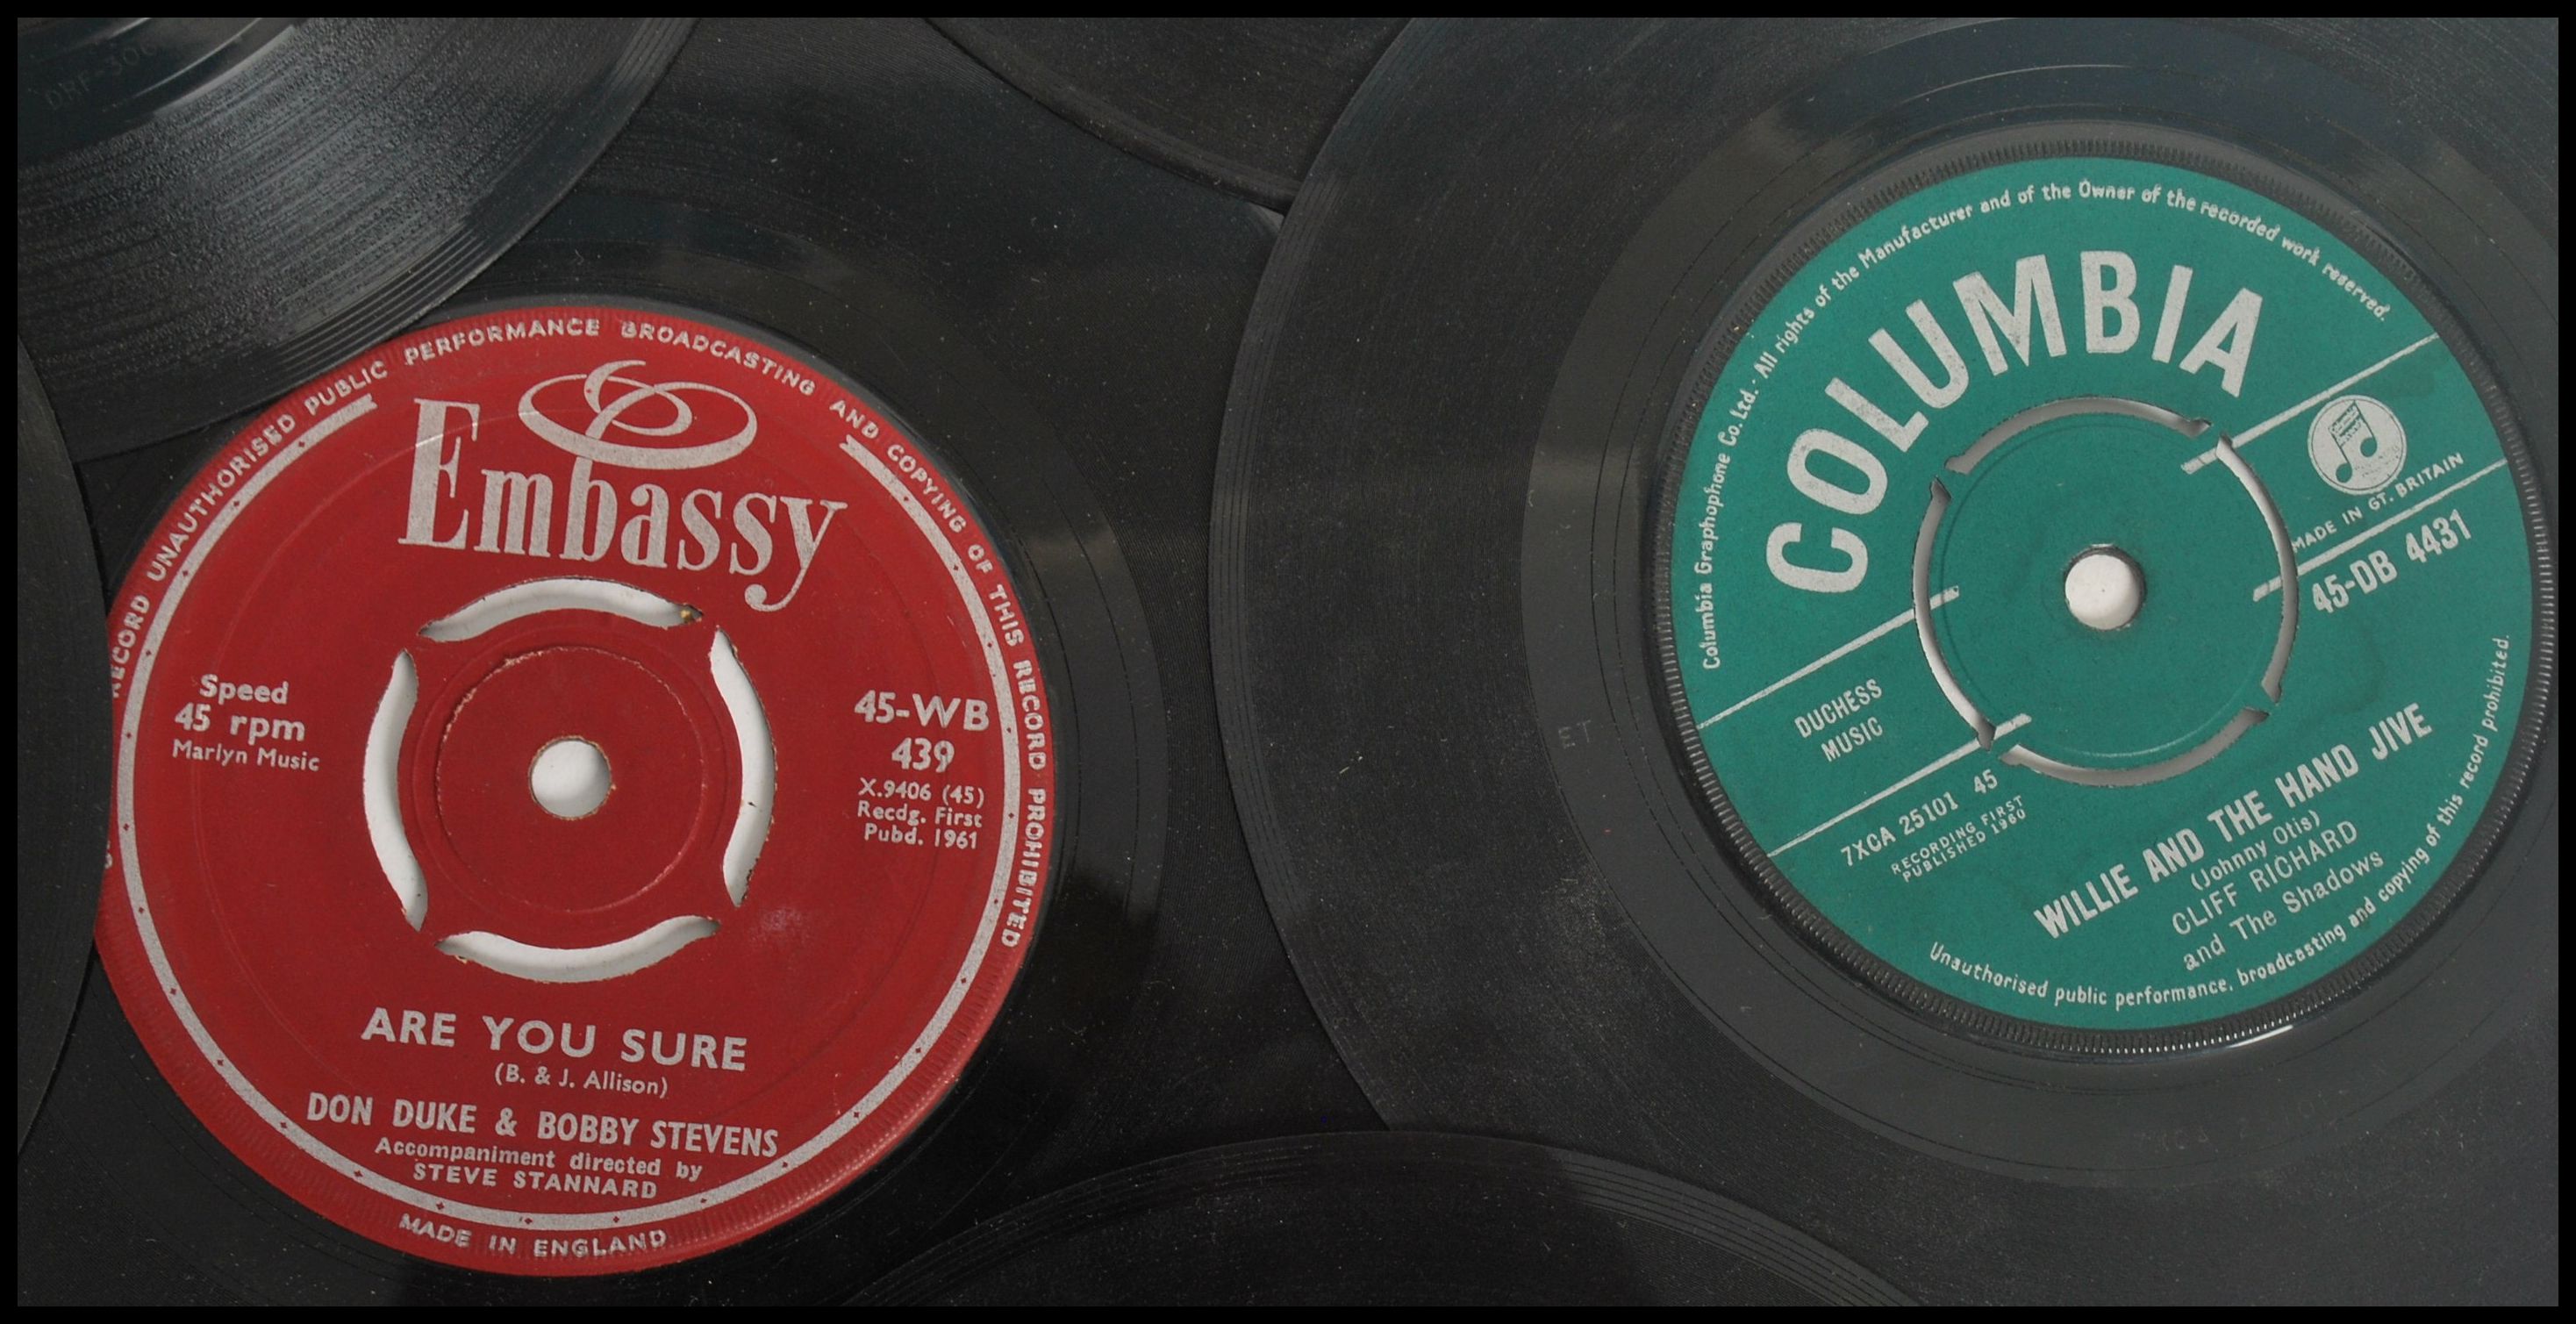 A collection of vinyl 7" 45rpm record singles dating from the 1960s featuring various artists and - Image 4 of 11